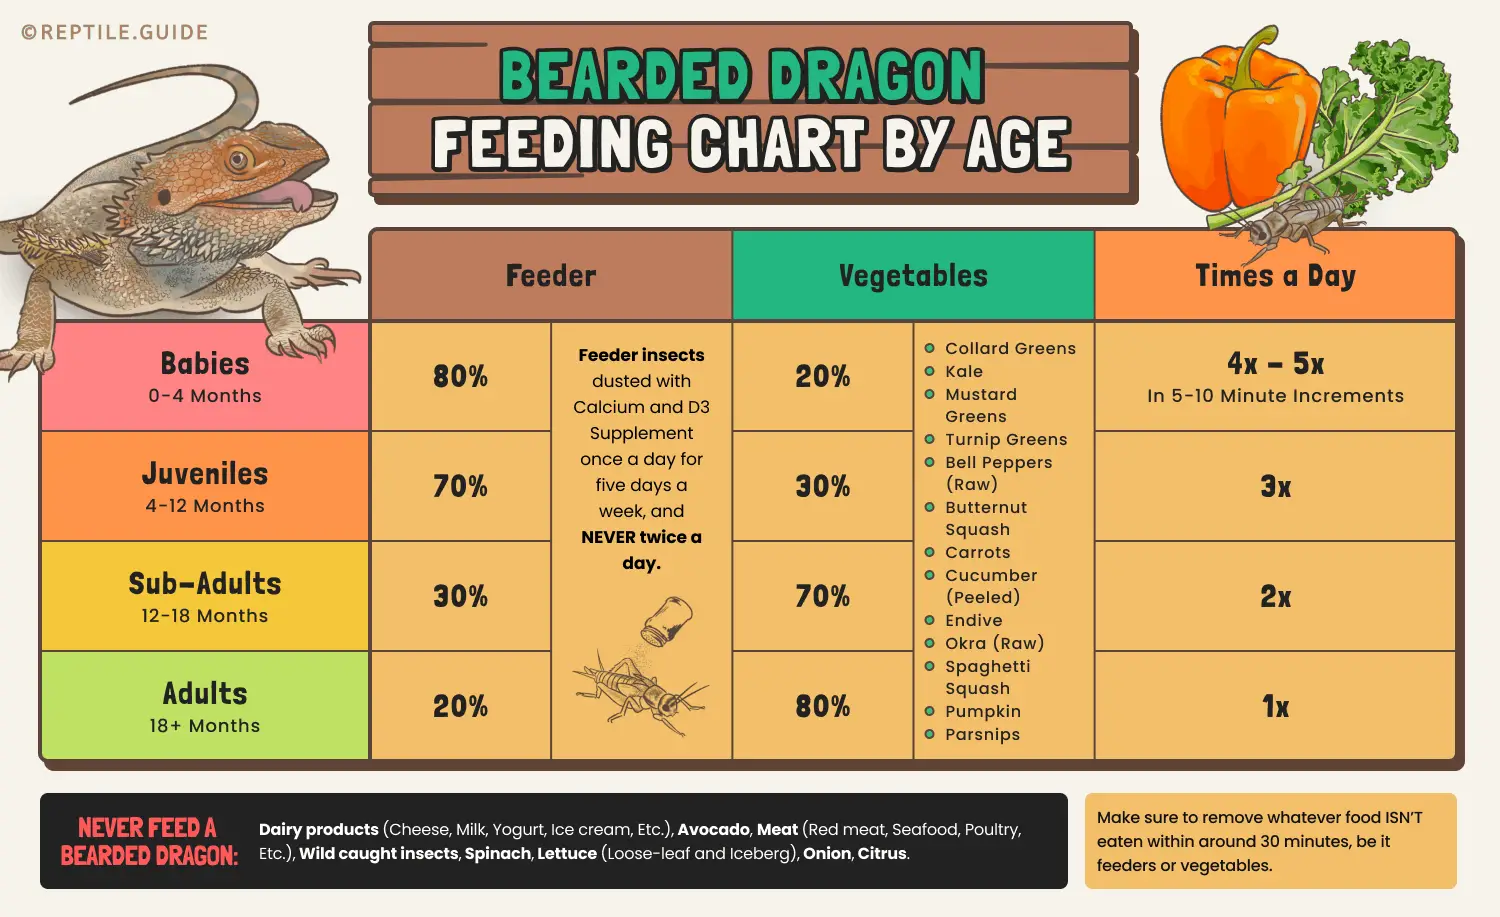 What Human Food Can Bearded Dragons Eat?